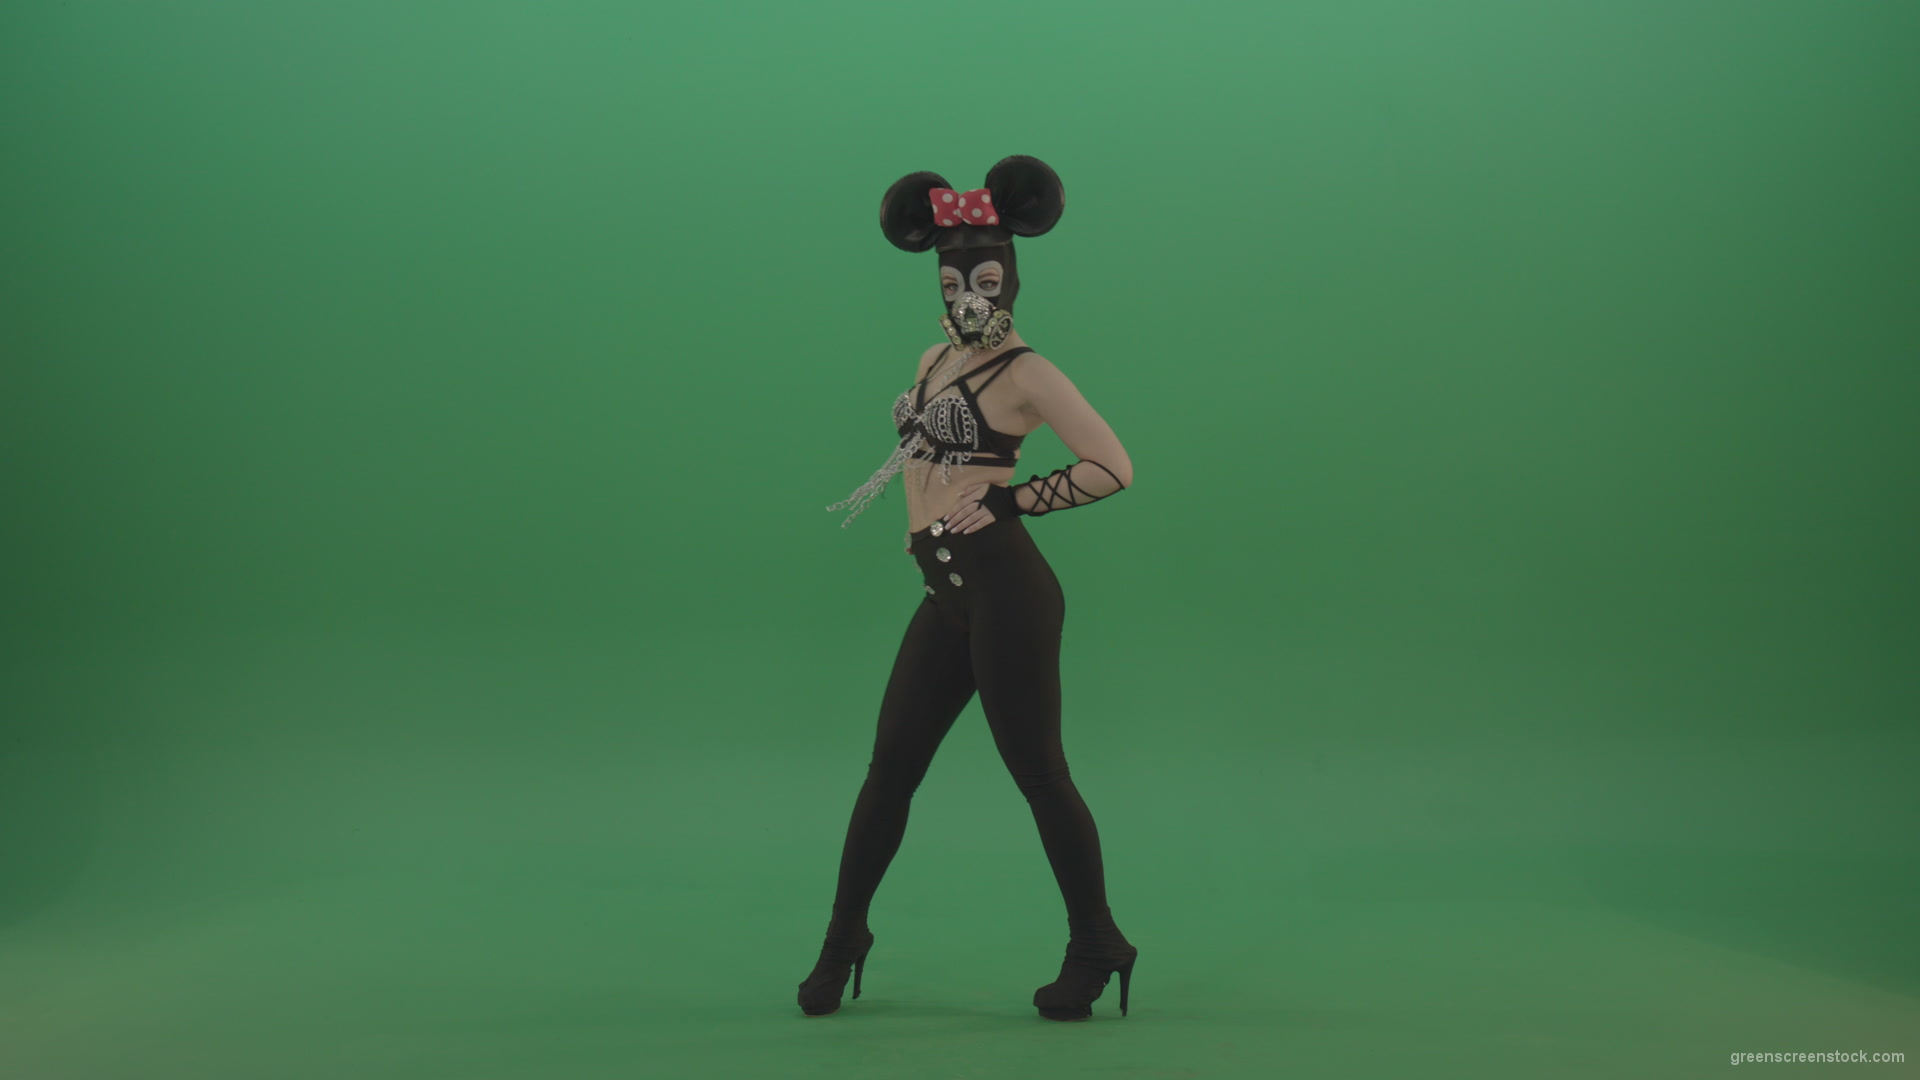 Mouse-Girl-in-mask-dancing-go-go-shaking-ass-and-posing-on-green-screen_008 Green Screen Stock